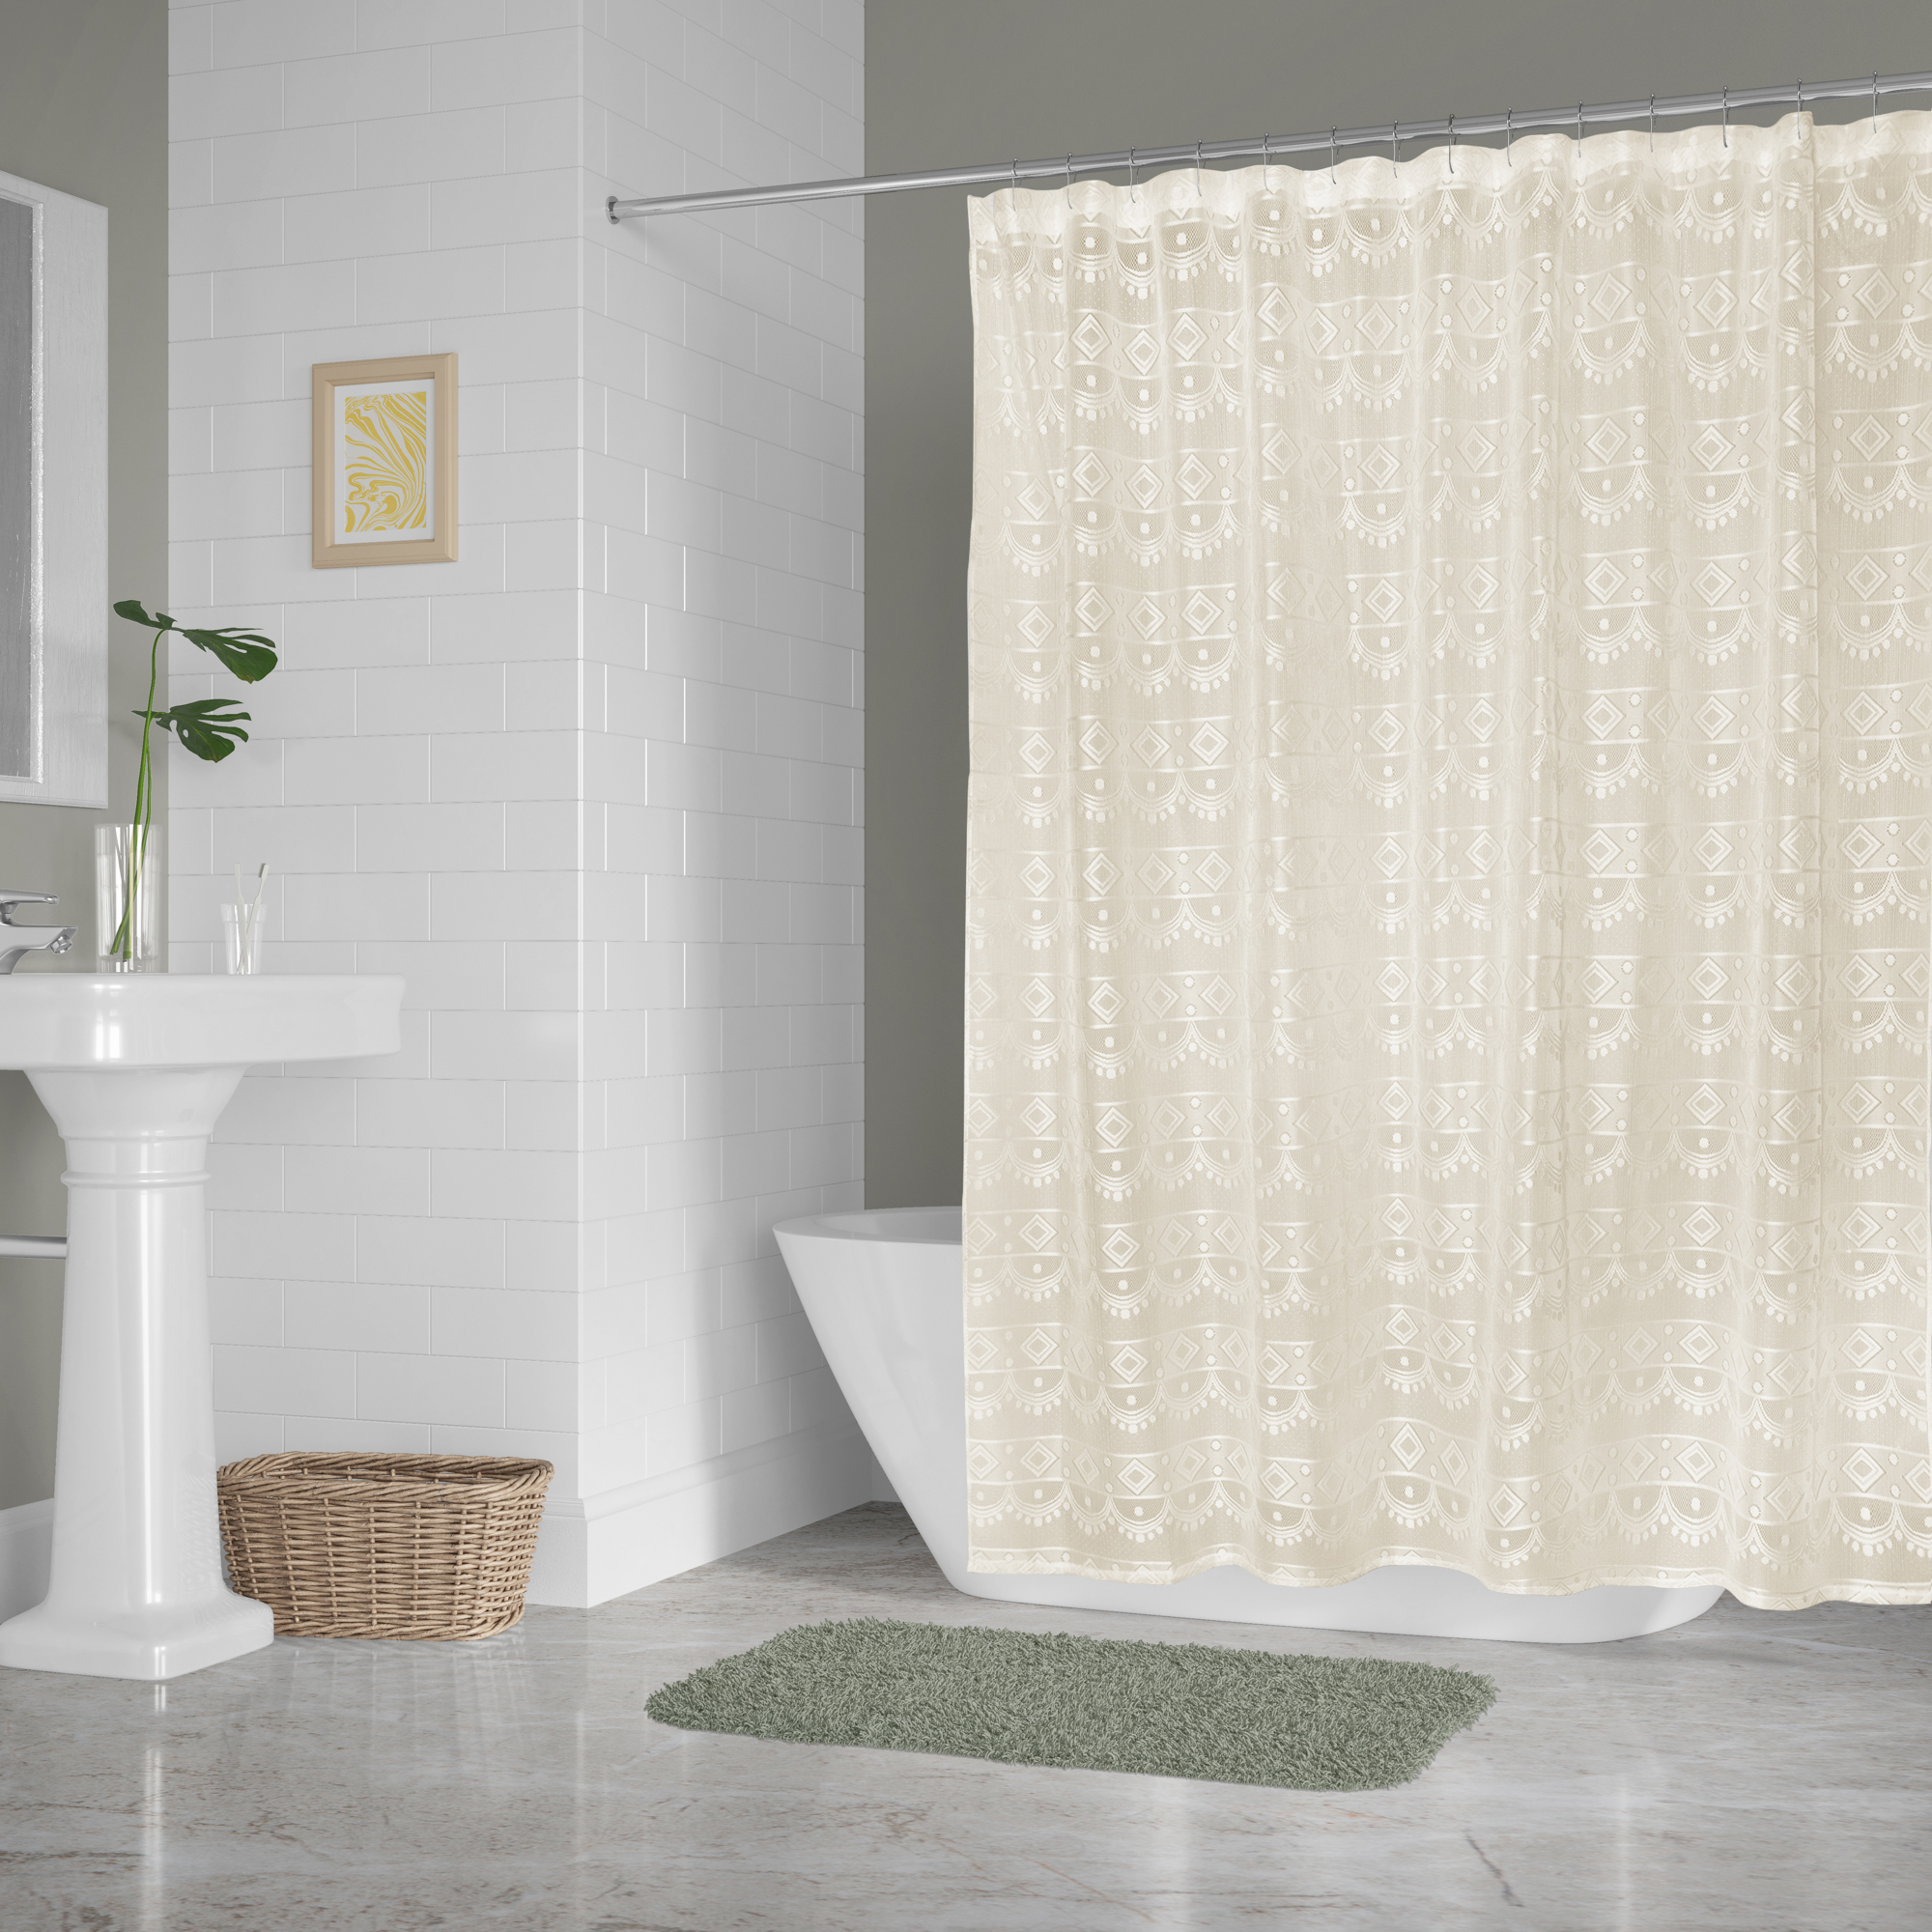 DII White Flower Blossom Lace Shower Curtain